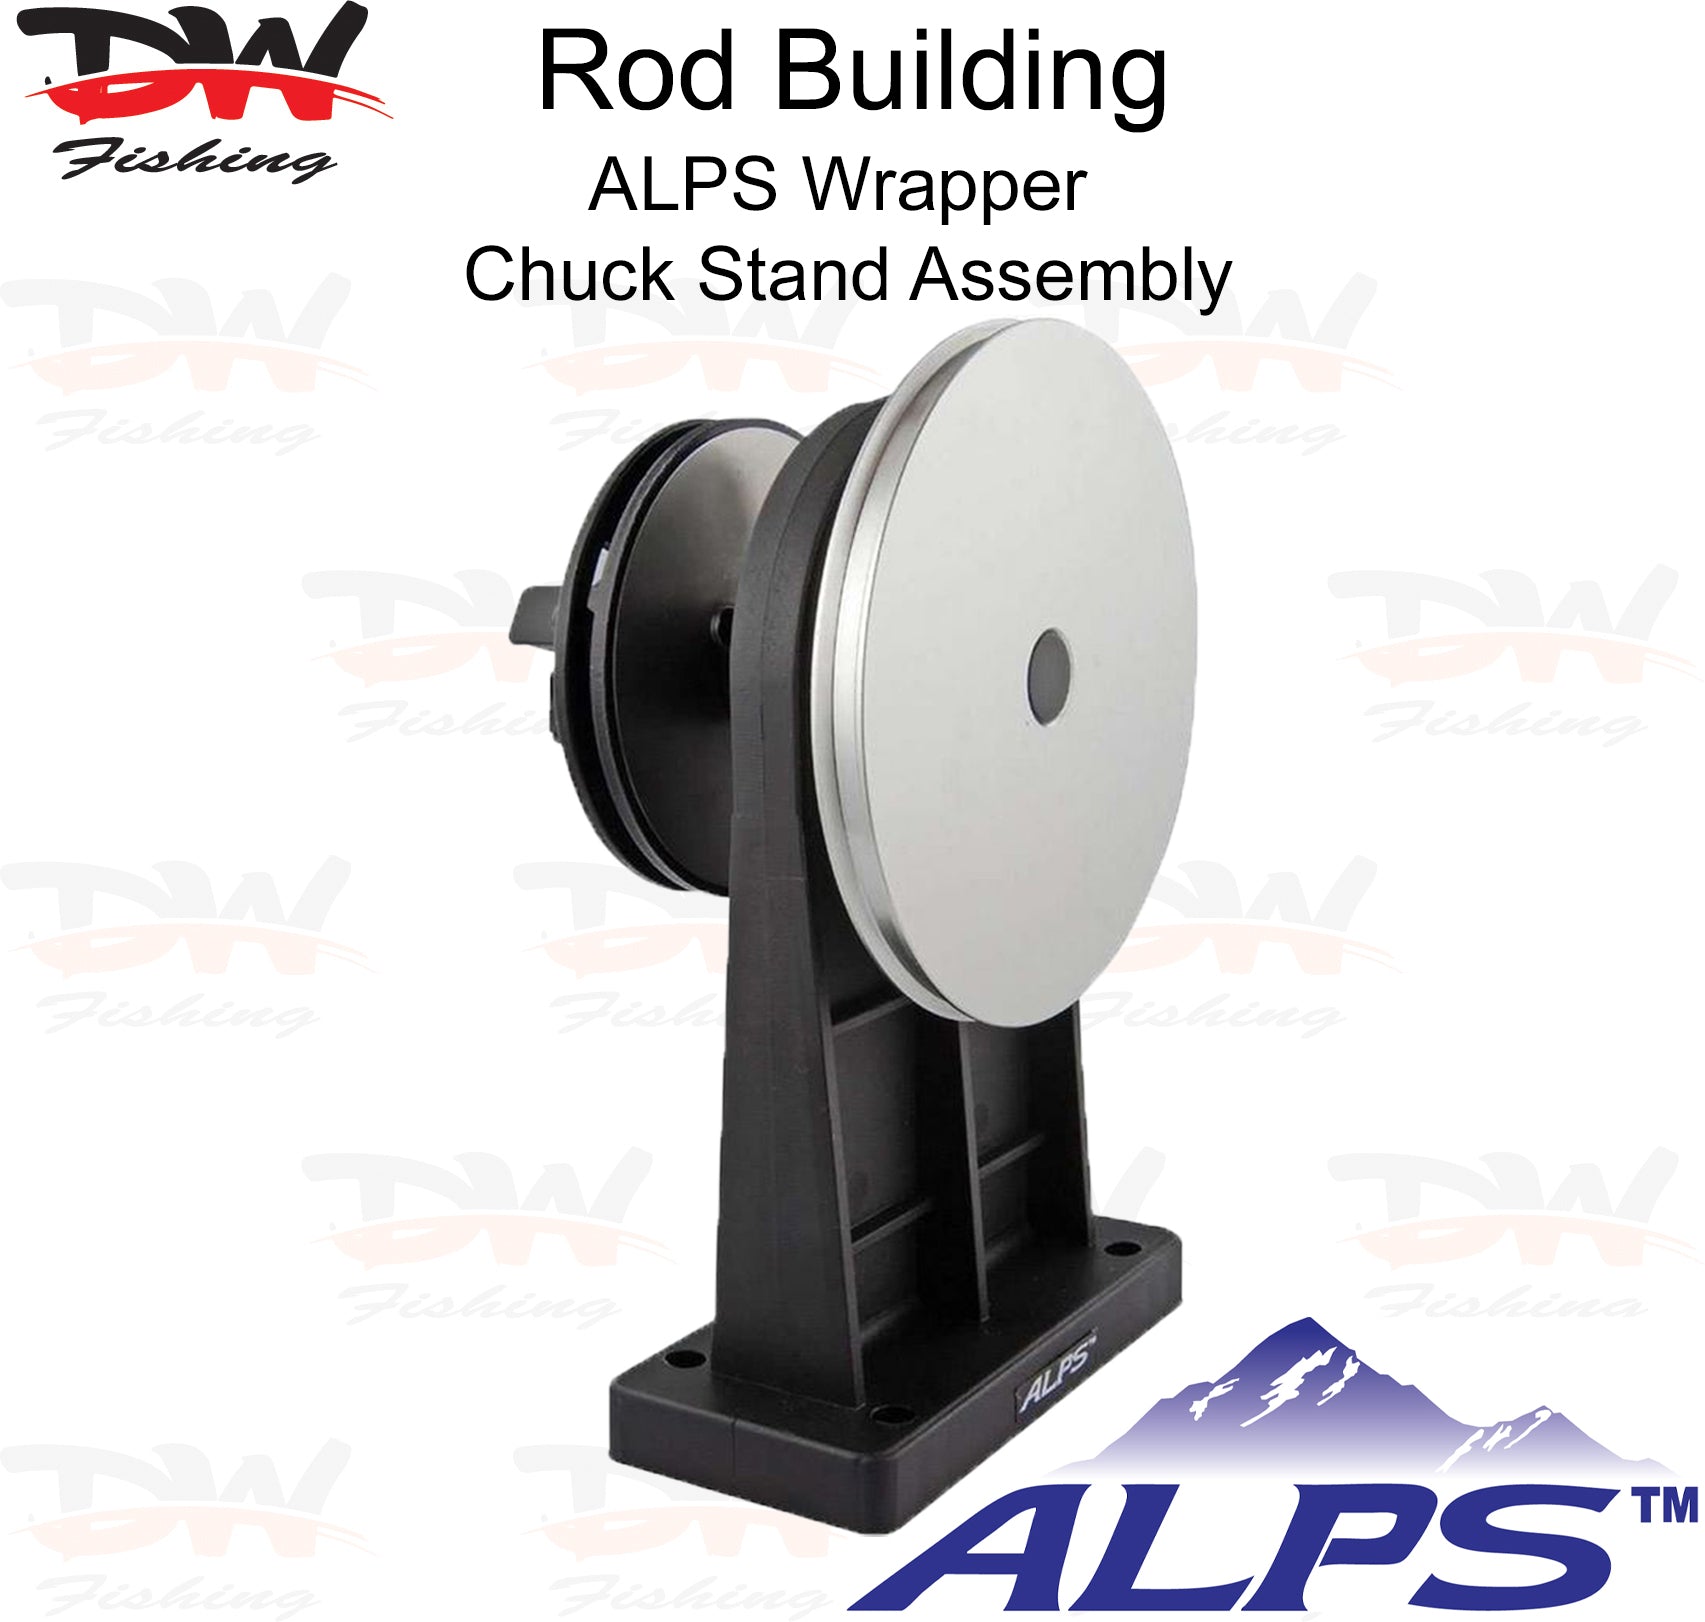 ALPS Rod Lathe - Wrapper Chuck Stand Assembly- RWM CS